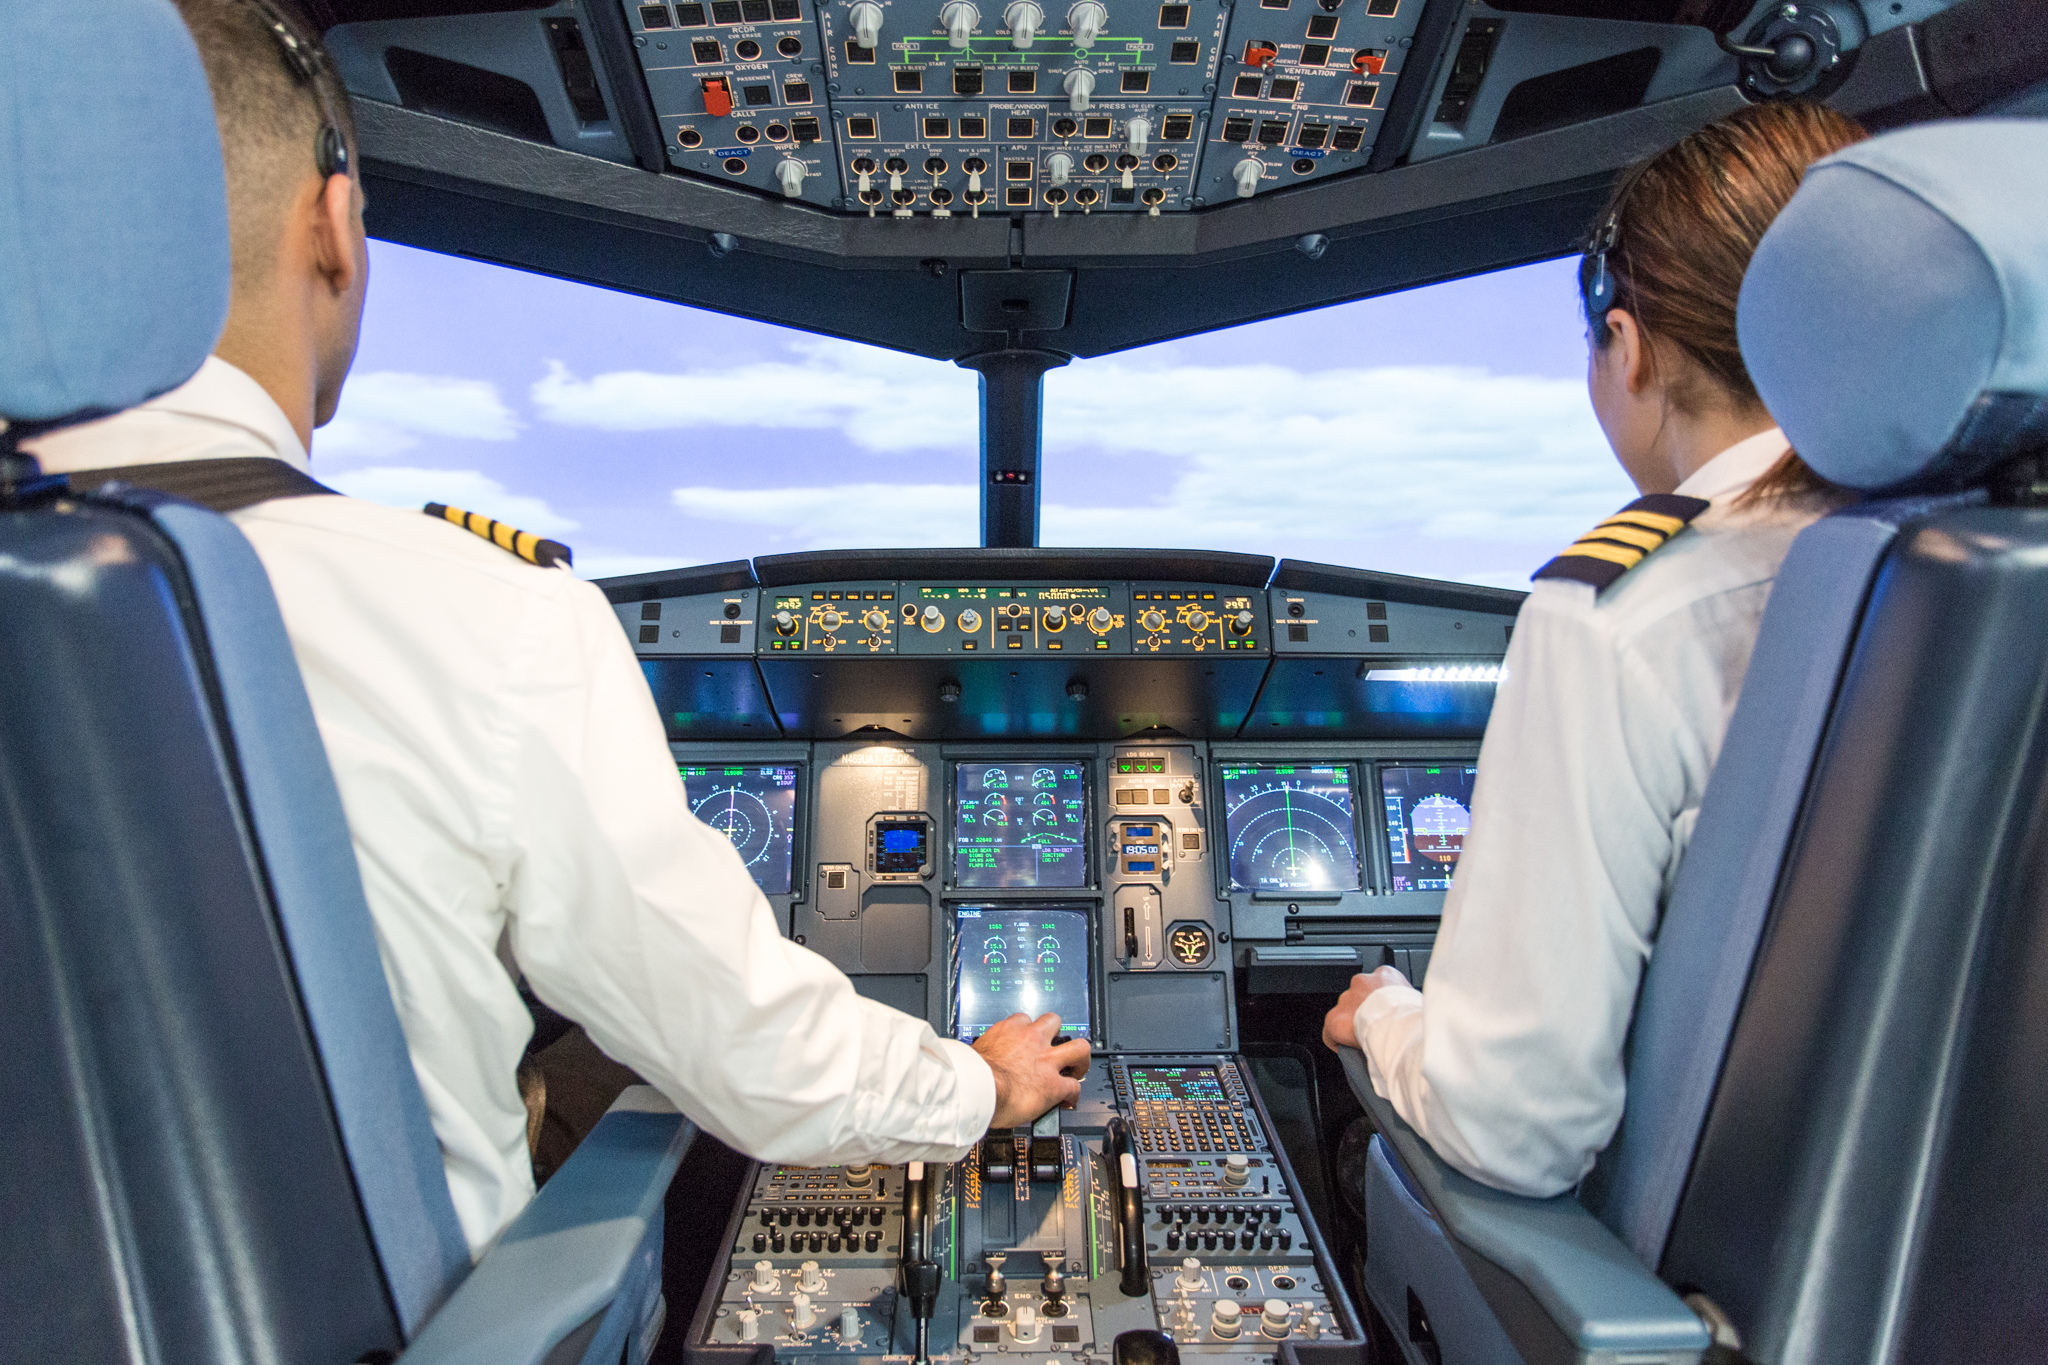 New Airbus A320 flight simulator experience takes off in Toronto - Skies Mag